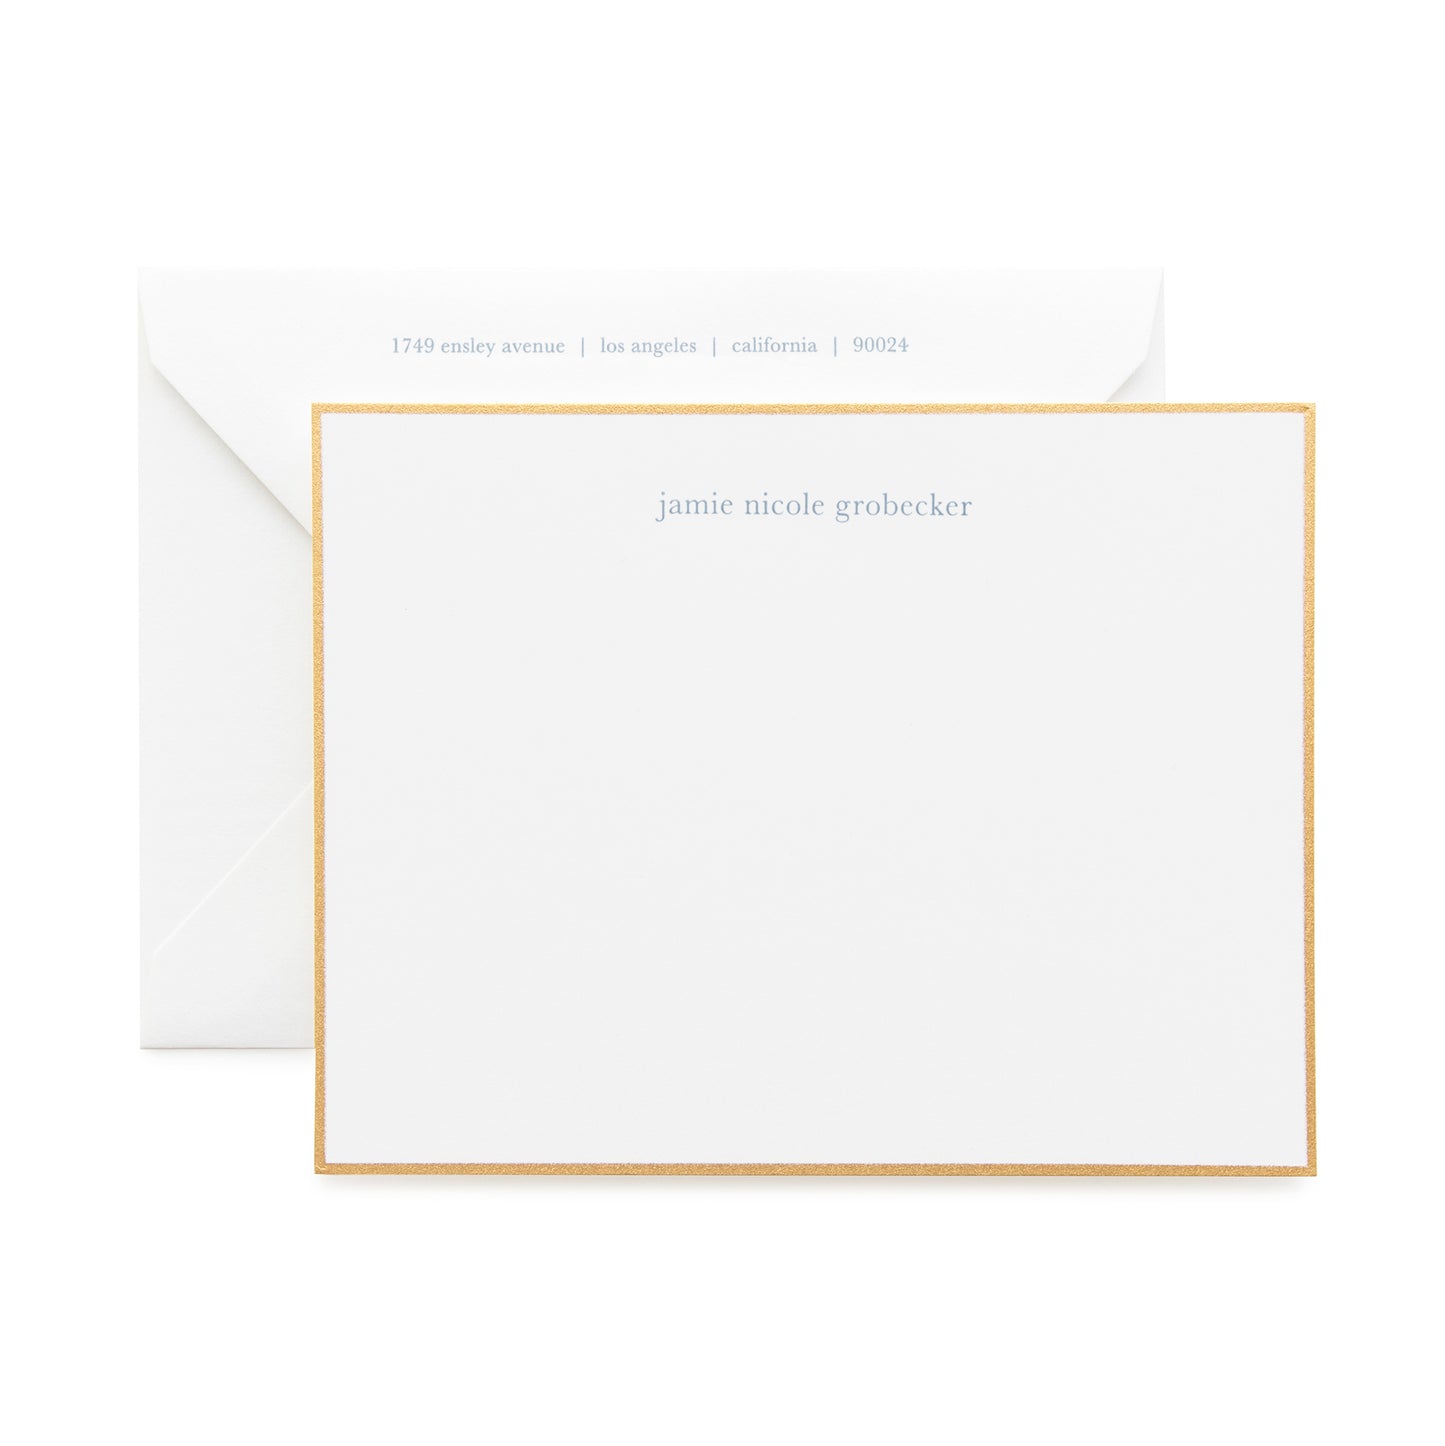 Dusty blue and white custom stationery with return address showing on envelope